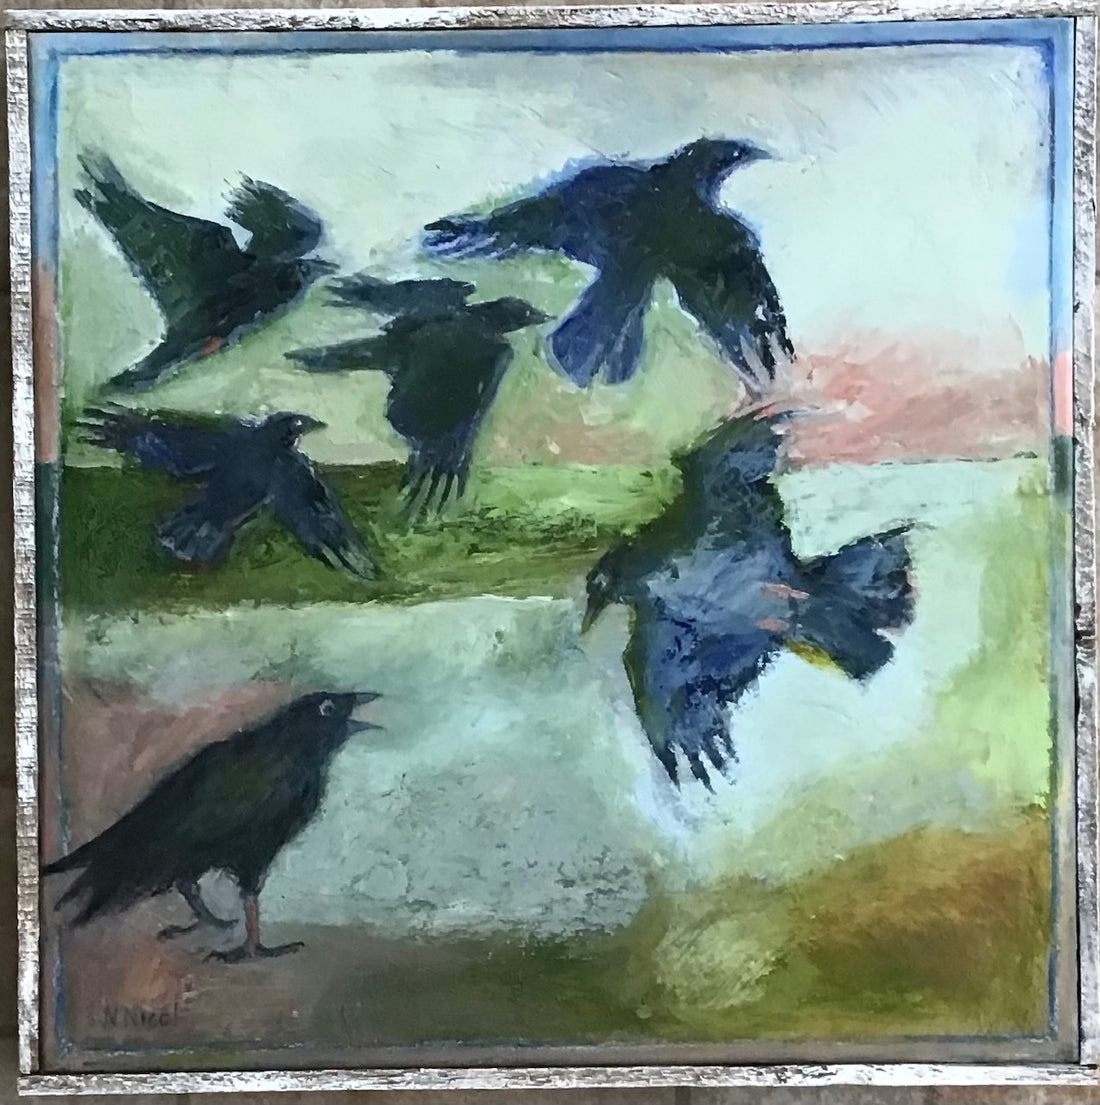 Crows on Display at Members Open at PAAM